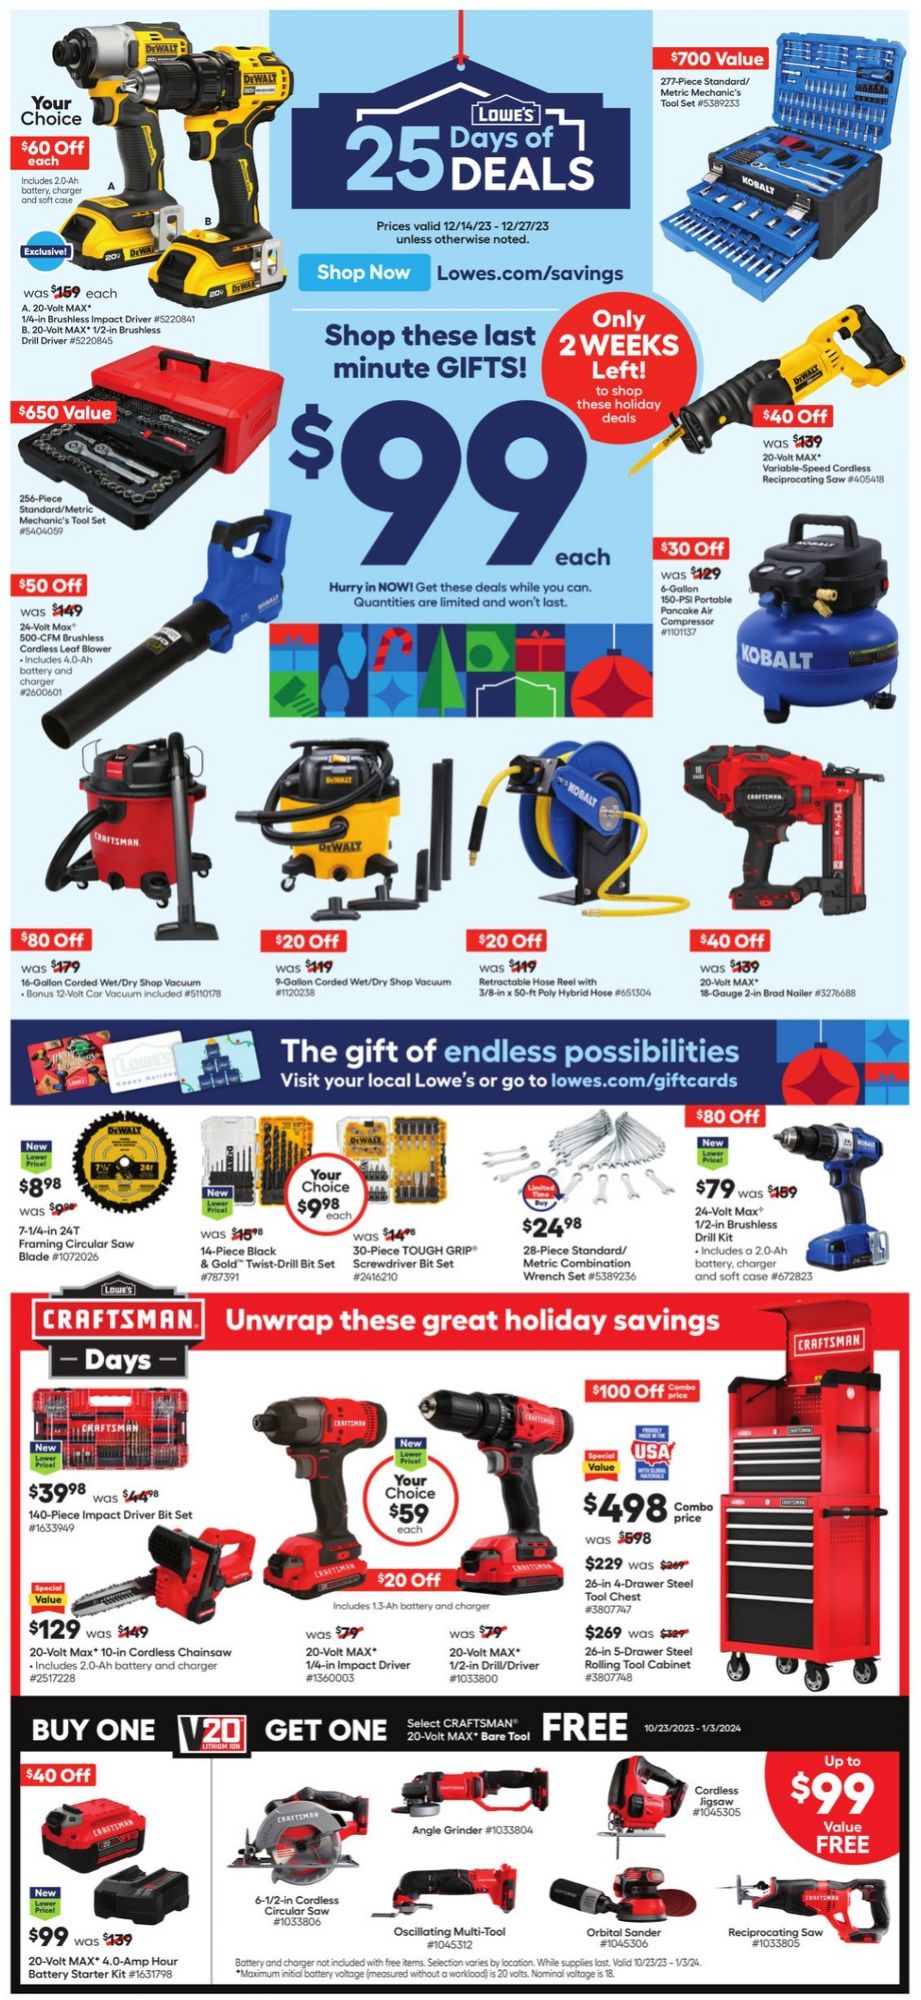 Lowe's Christmas July 2024 Weekly Sales, Deals, Discounts and Digital Coupons.